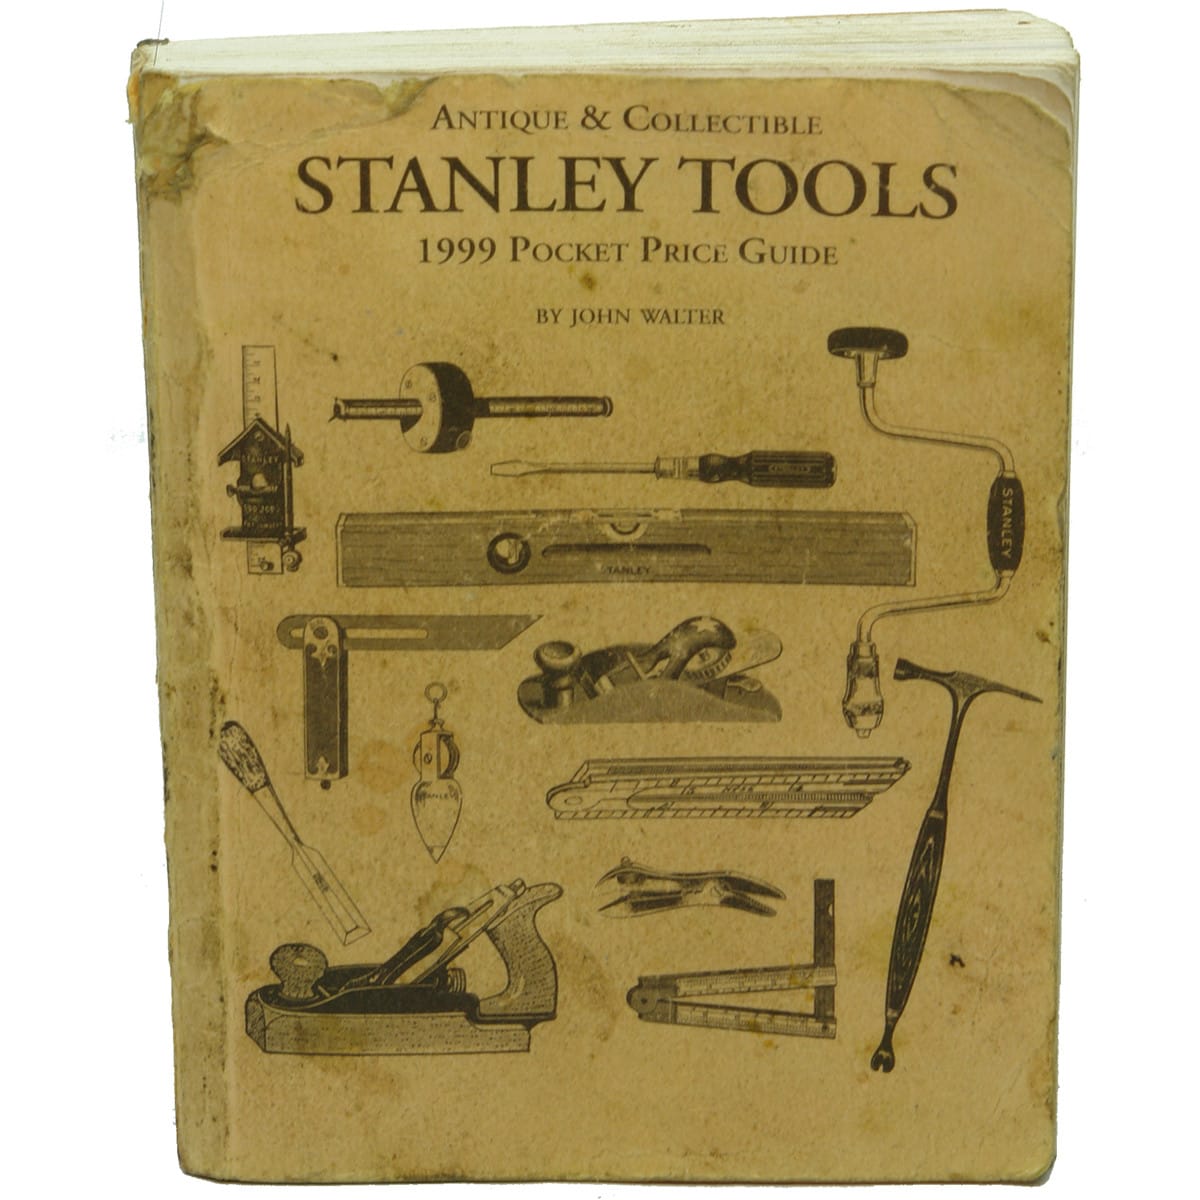 Book. Antique & Collectible Stanley Tools 1999 Pocket Price Guide. John Walter. (USA)